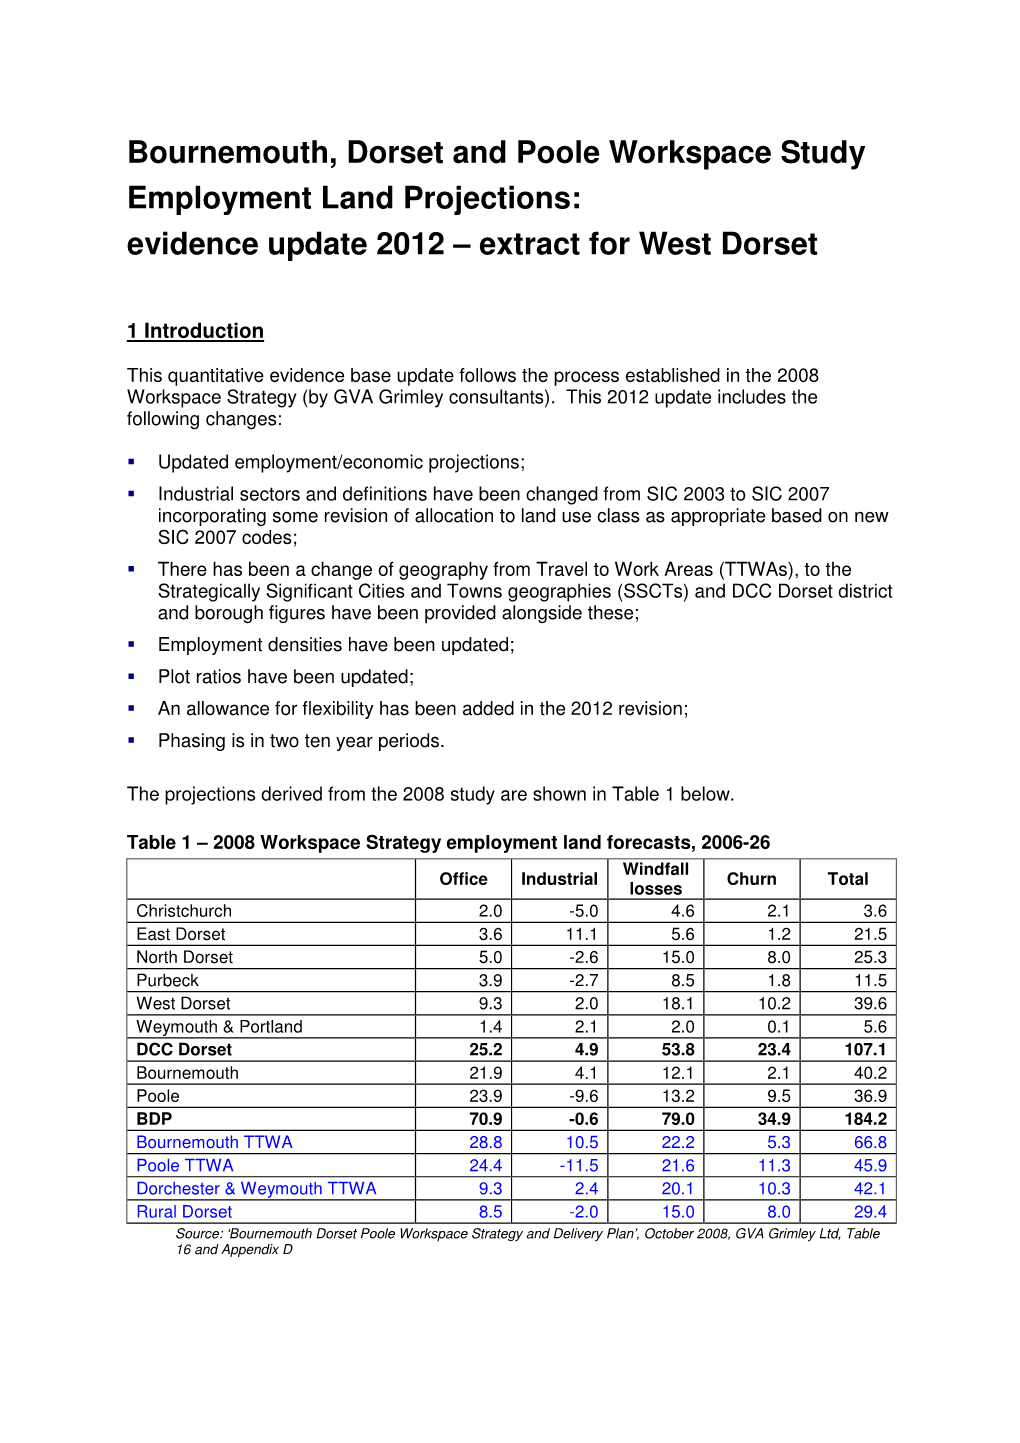 Bournemouth, Dorset and Poole Workspace Study Employment Land Projections: Evidence Update 2012 – Extract for West Dorset